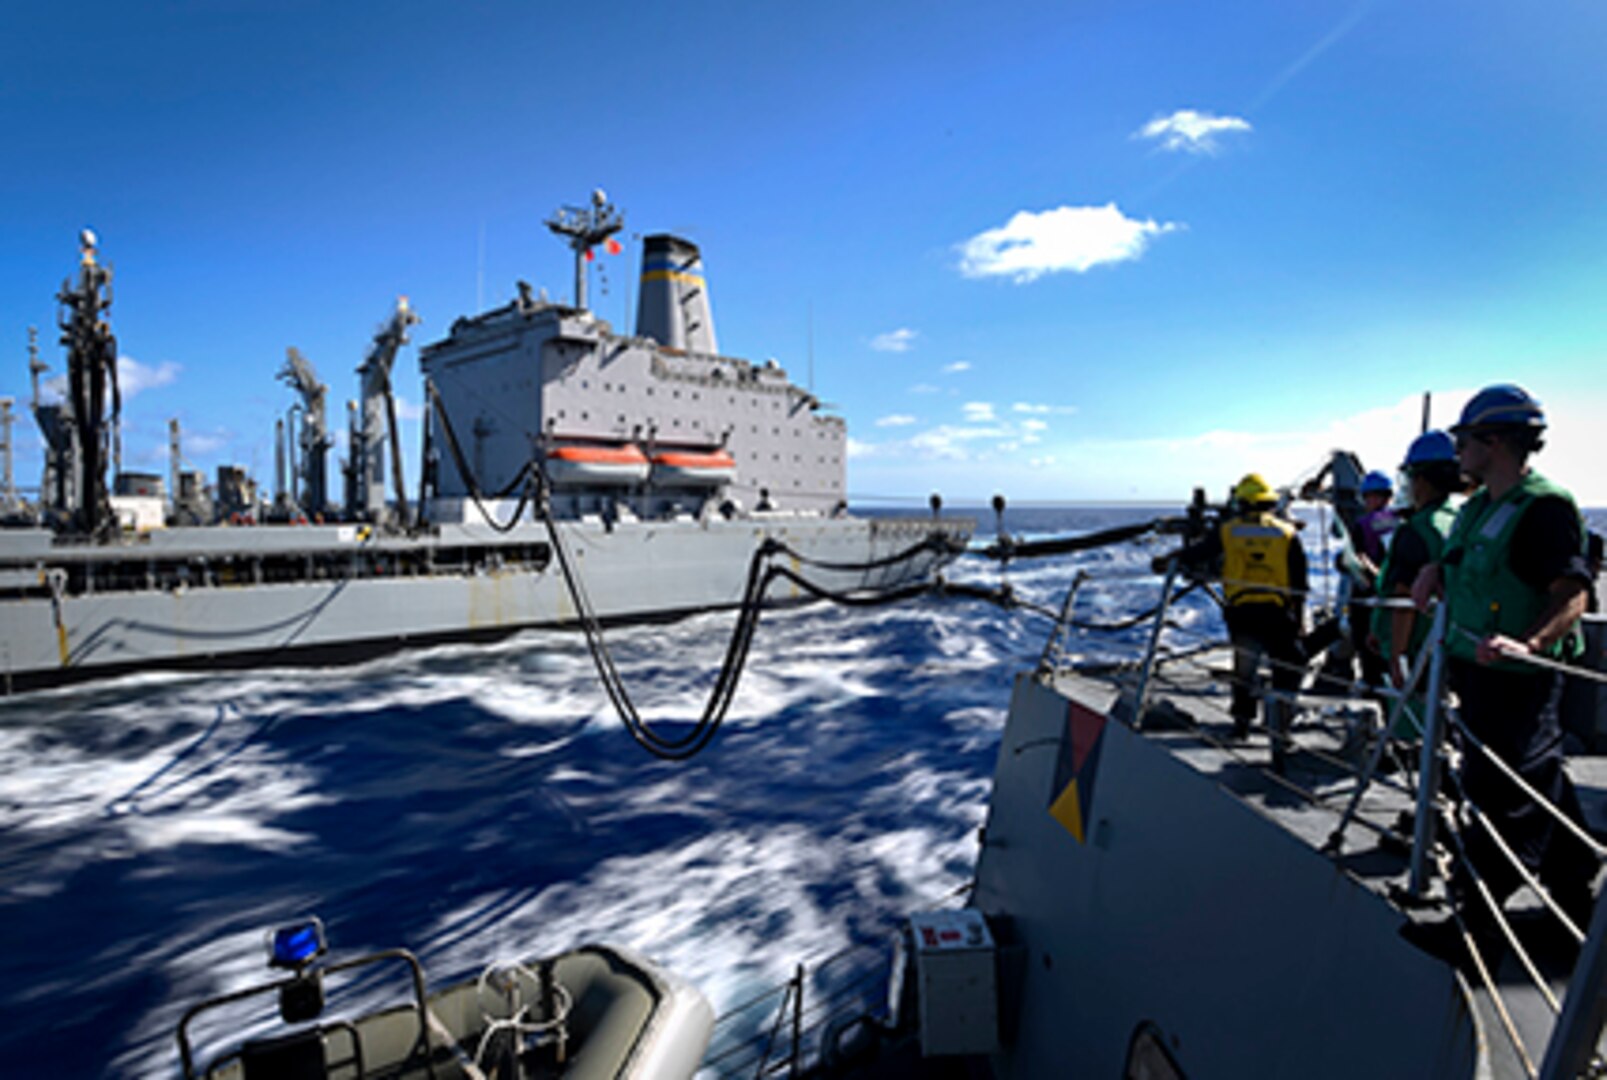 PACIFIC OCEAN (July 29, 2016) – Sailors assigned to the Arleigh Burke-class guided-missile destroyer USS Shoup (DDG 86) conduct an underway replenishment with the Military Sealift Command fleet replenishment oiler USNS Rappahannock (T-AO 204), during Rim of the Pacific 2016. Twenty-six nations, more than 40 ships and submarines, more than 200 aircraft and 25,000 personnel are participating in RIMPAC from June 30 to Aug. 4, in and around the Hawaiian Islands and Southern California.  The world's largest international maritime exercise, RIMPAC provides a unique training opportunity that helps participants foster and sustain the cooperative relationships that are critical to ensuring the safety of sea lanes and security on the world's oceans. RIMPAC 2016 is the 25th exercise in the series that began in 1971. 